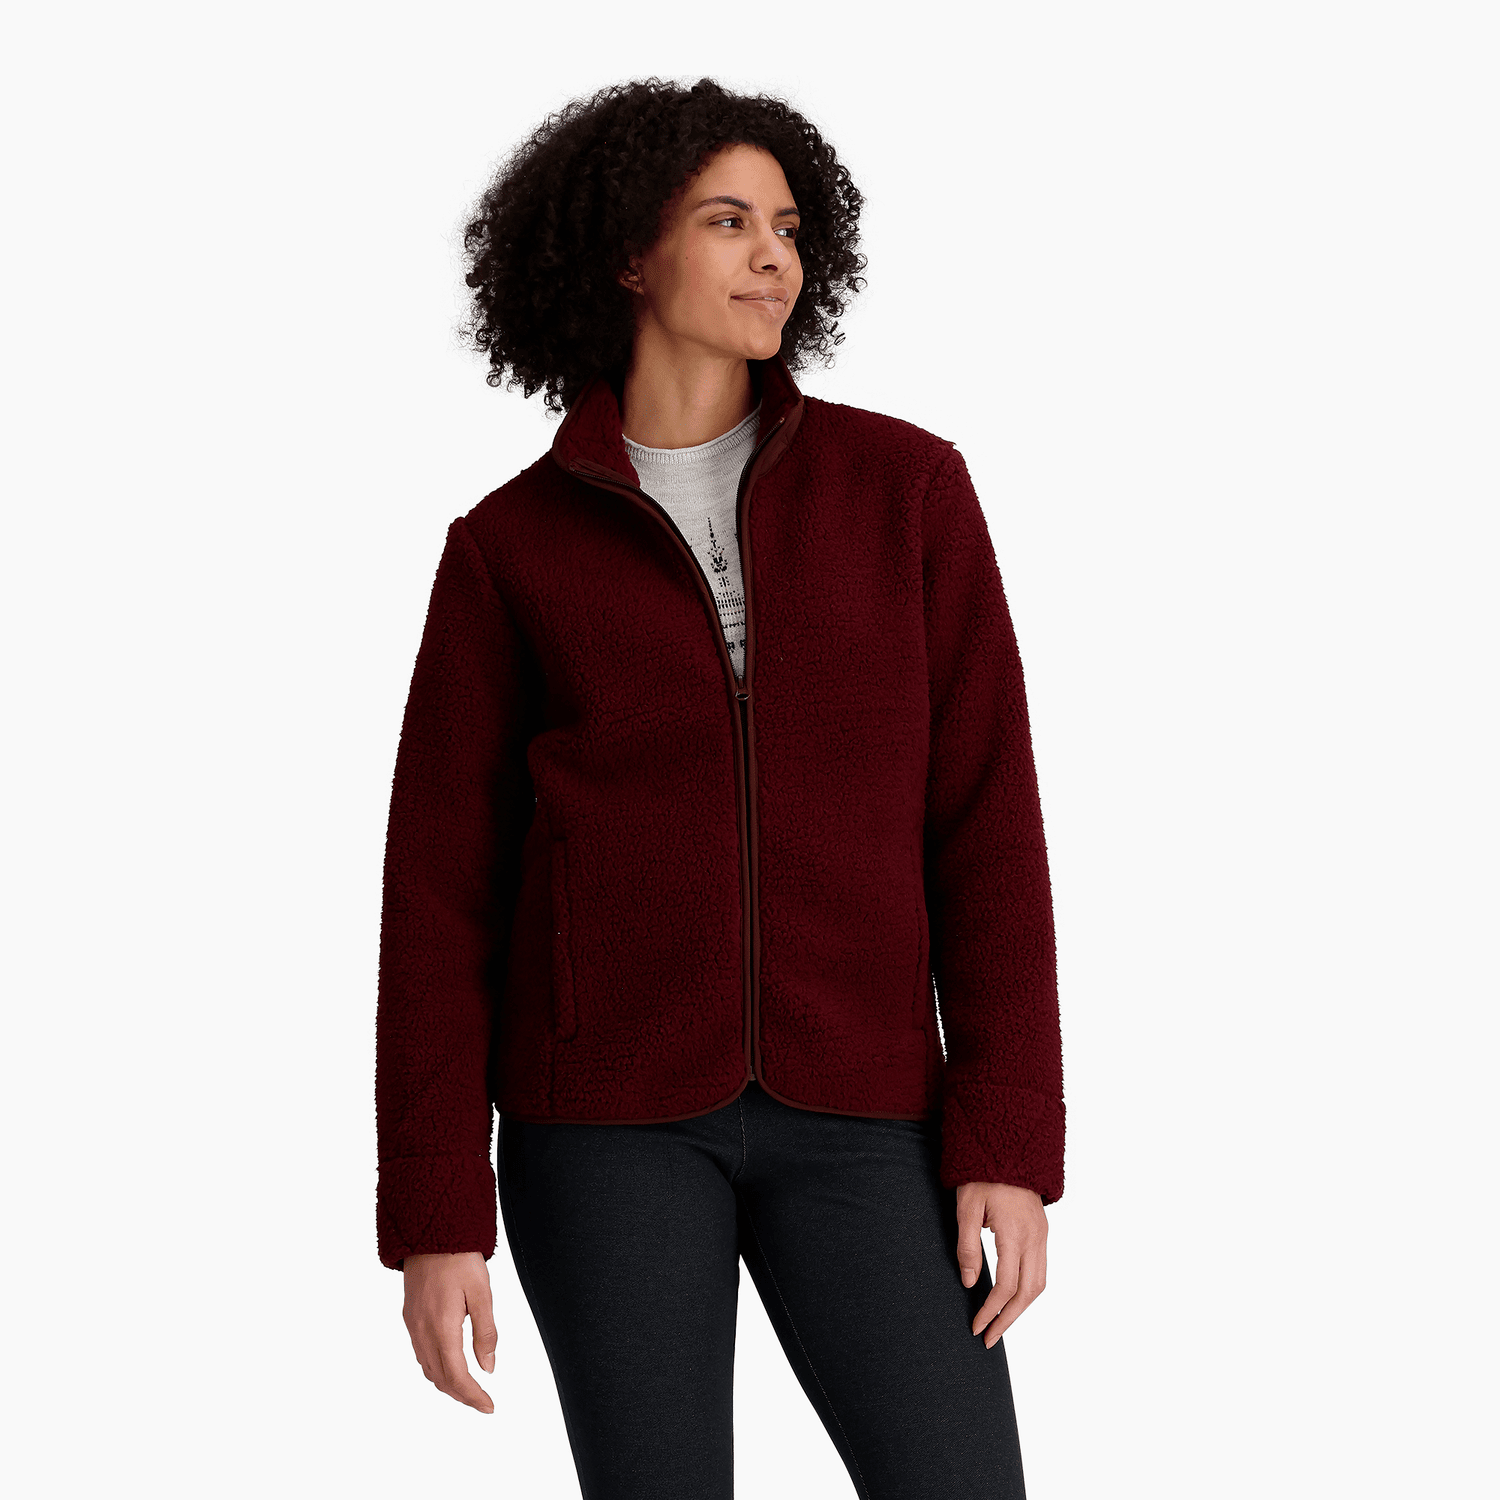 Royal Robbins - W's Urbanesque fleece jacket - Polyester & Recycled polyester - Weekendbee - sustainable sportswear